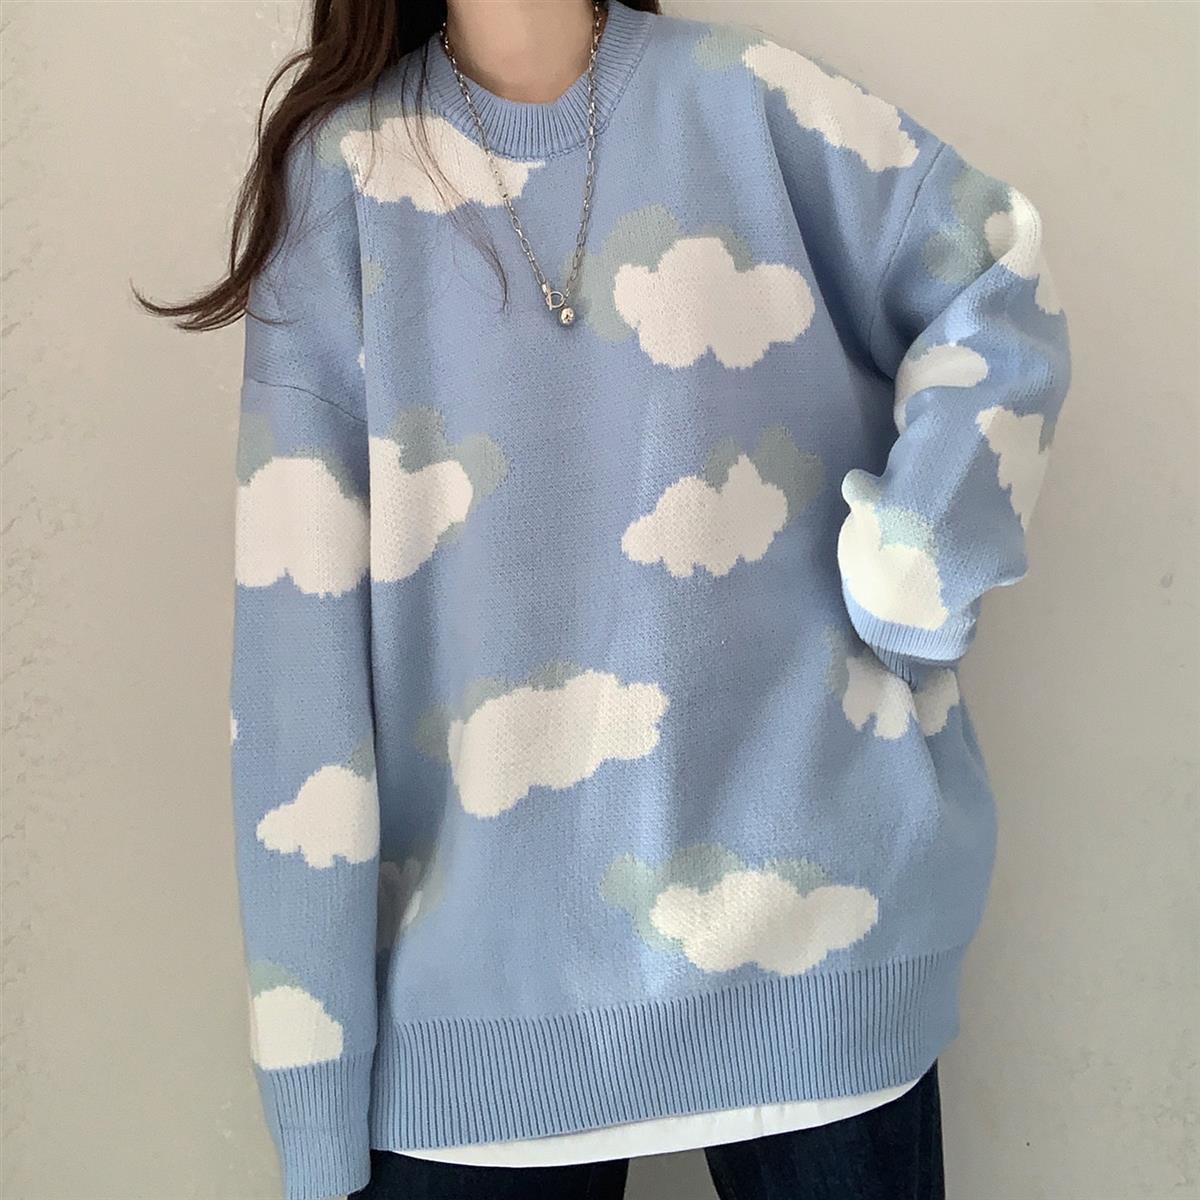 Sweaters Women Harajuku Lovely Chic Preppy Simple Soft Loose Autumn Spring Teens Knitwear Casual Fashion Korean Girls Pullover